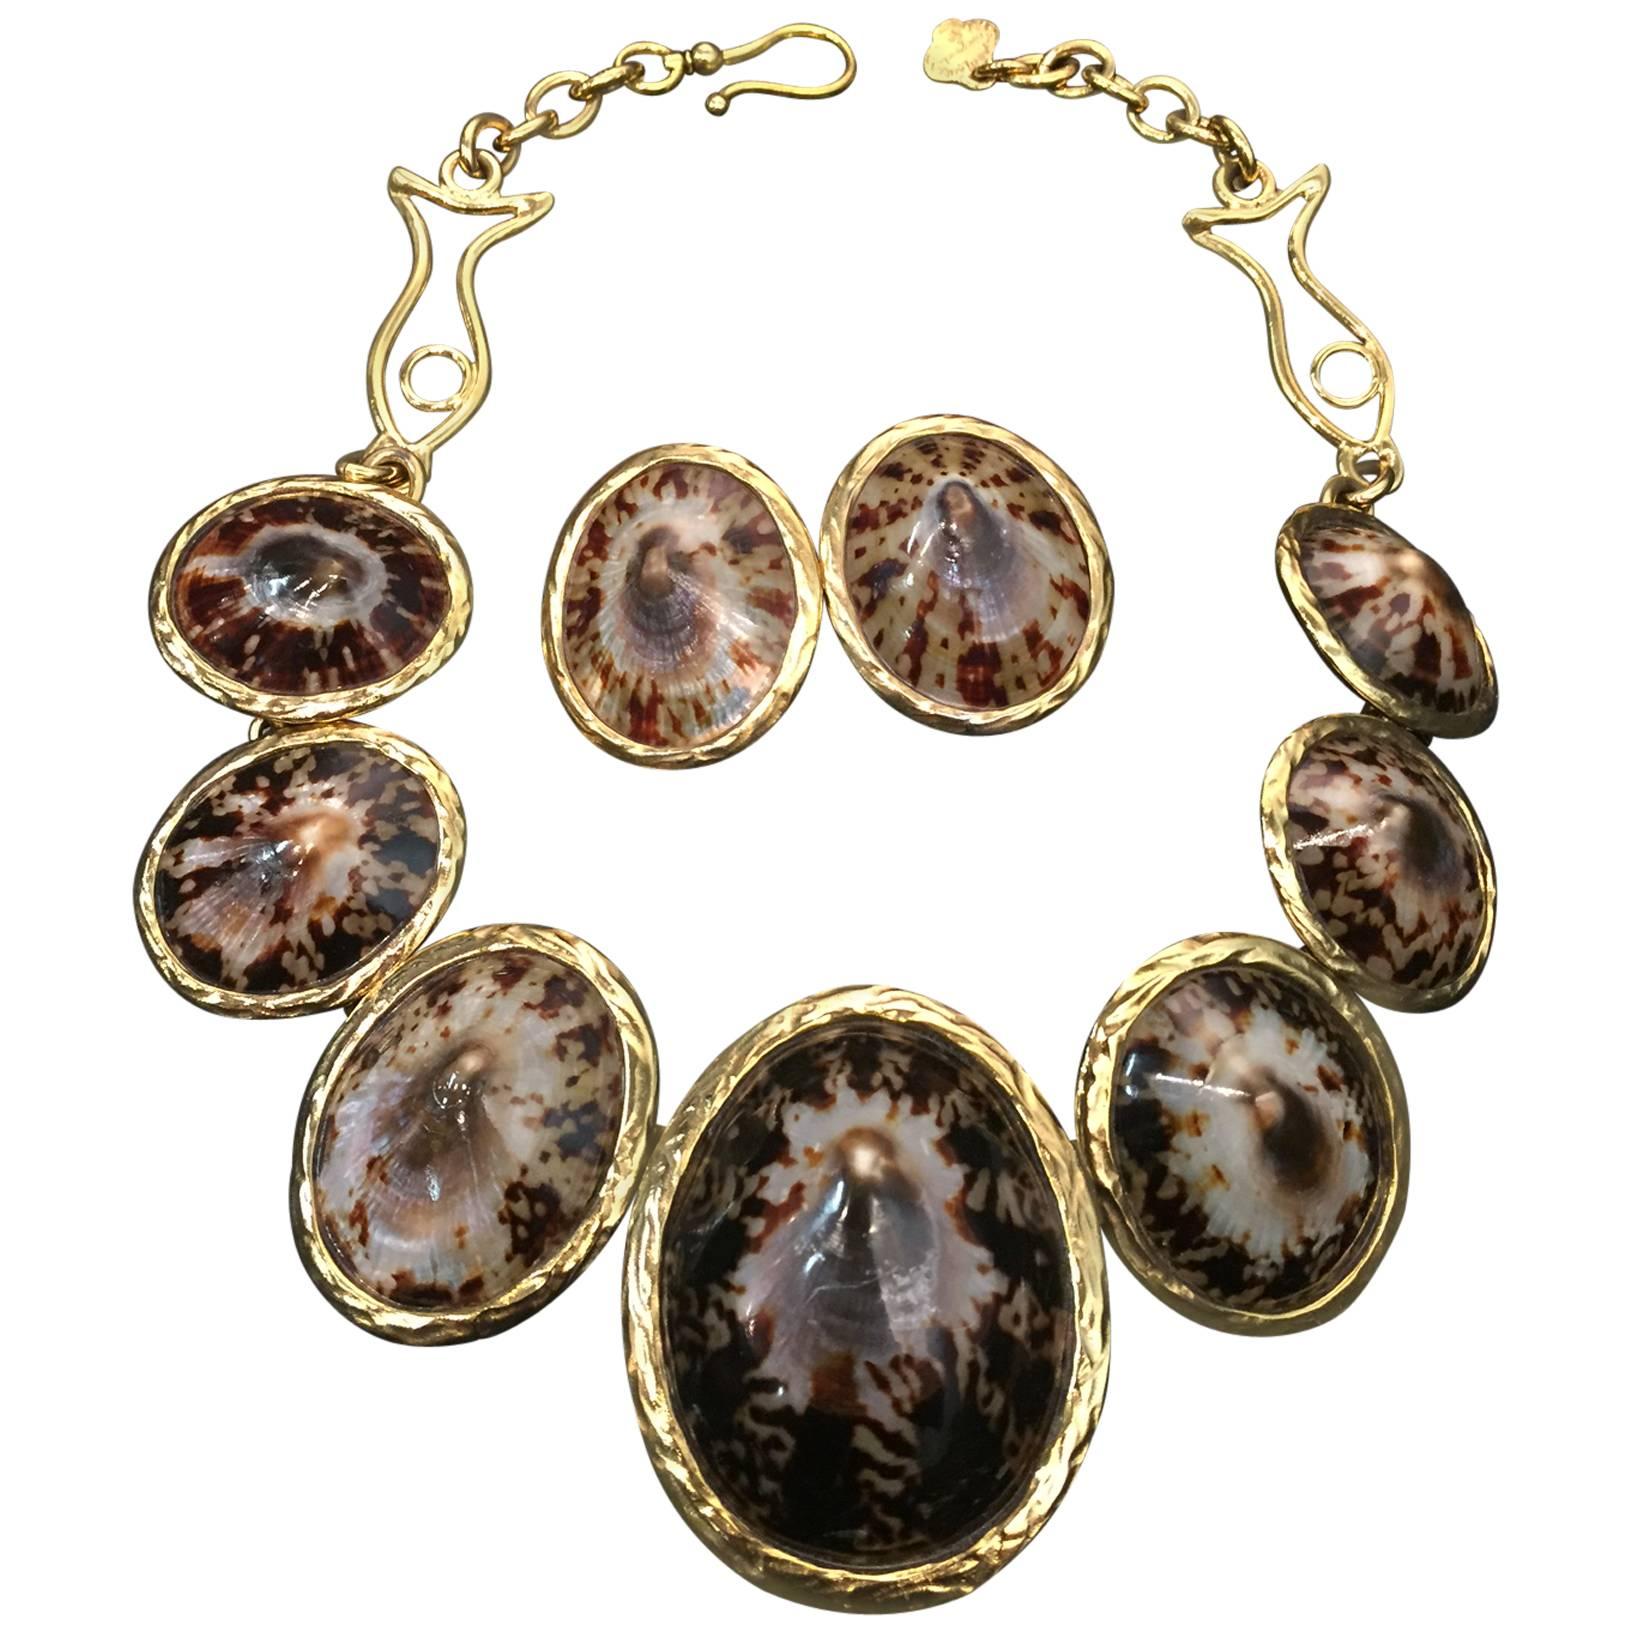 Yves Saint Laurent Rive Gauche Leopard Mollusk Shell Necklace and Earring Set For Sale